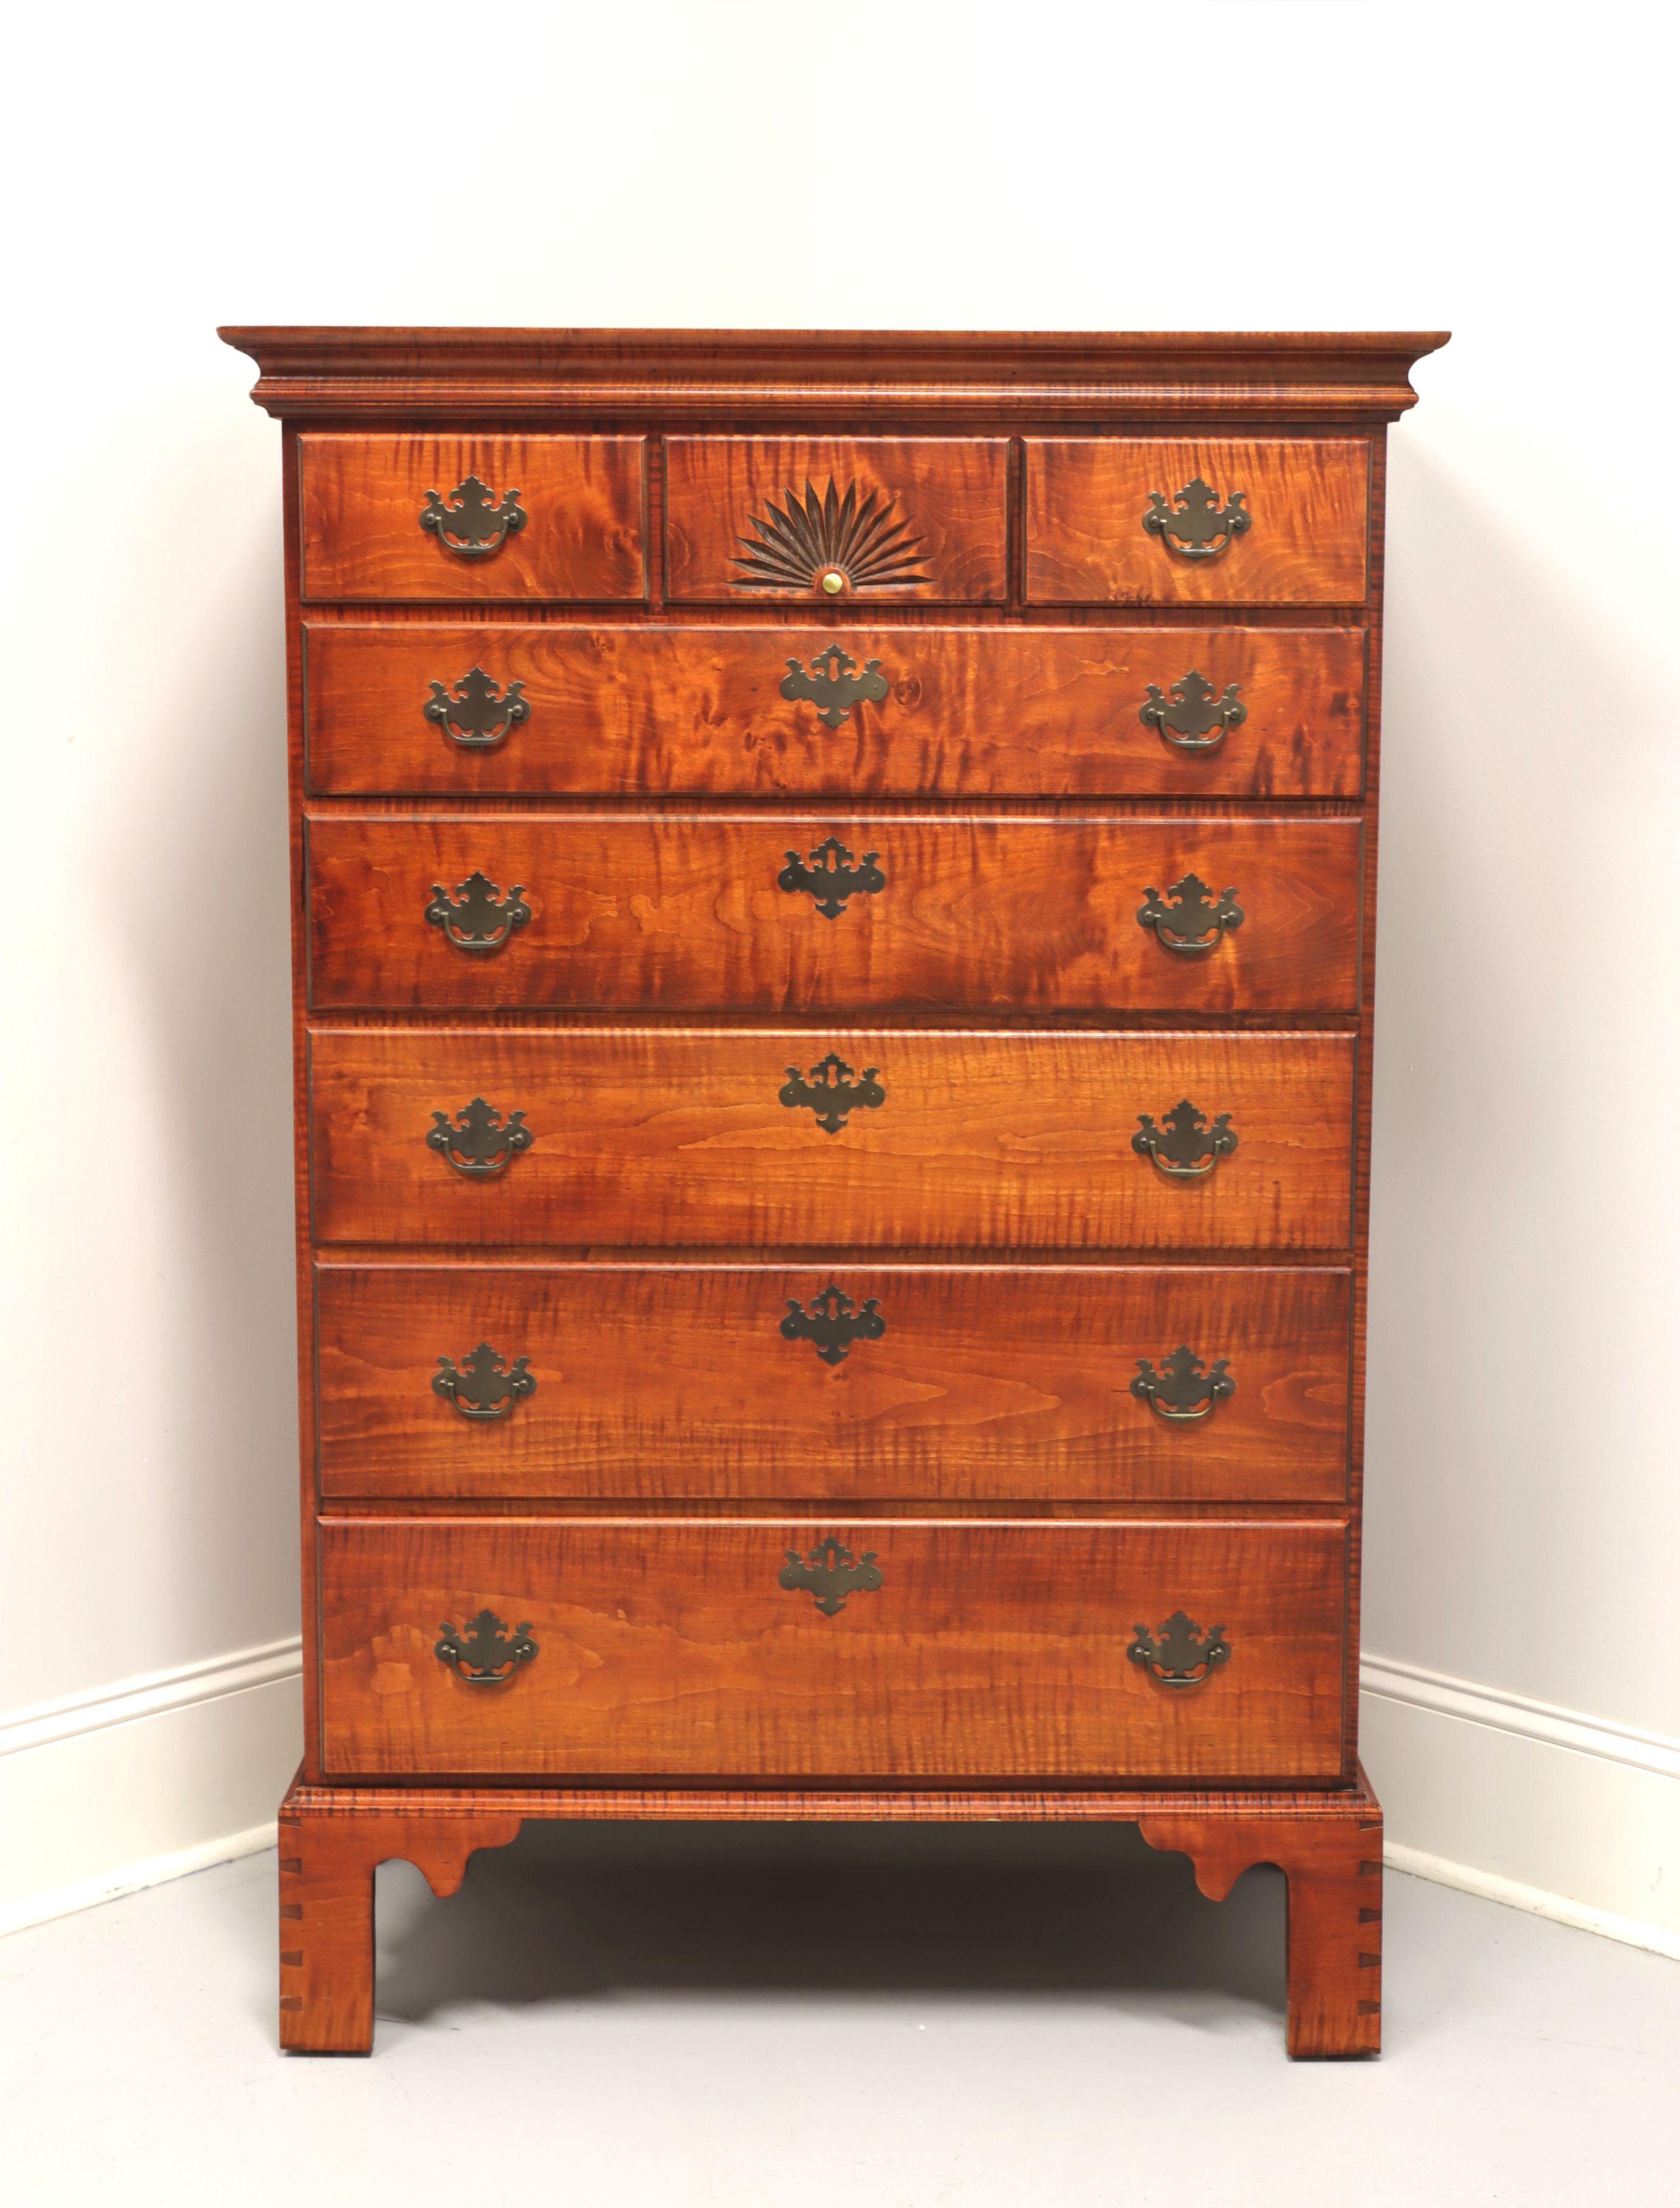 A Chippendale style chest of drawers by JL Treharn. Solid tiger maple with brass hardware, crown molding at top and bracket feet. Features eight various size drawers of dovetail construction. Upper center drawer has decorative carved fan design and